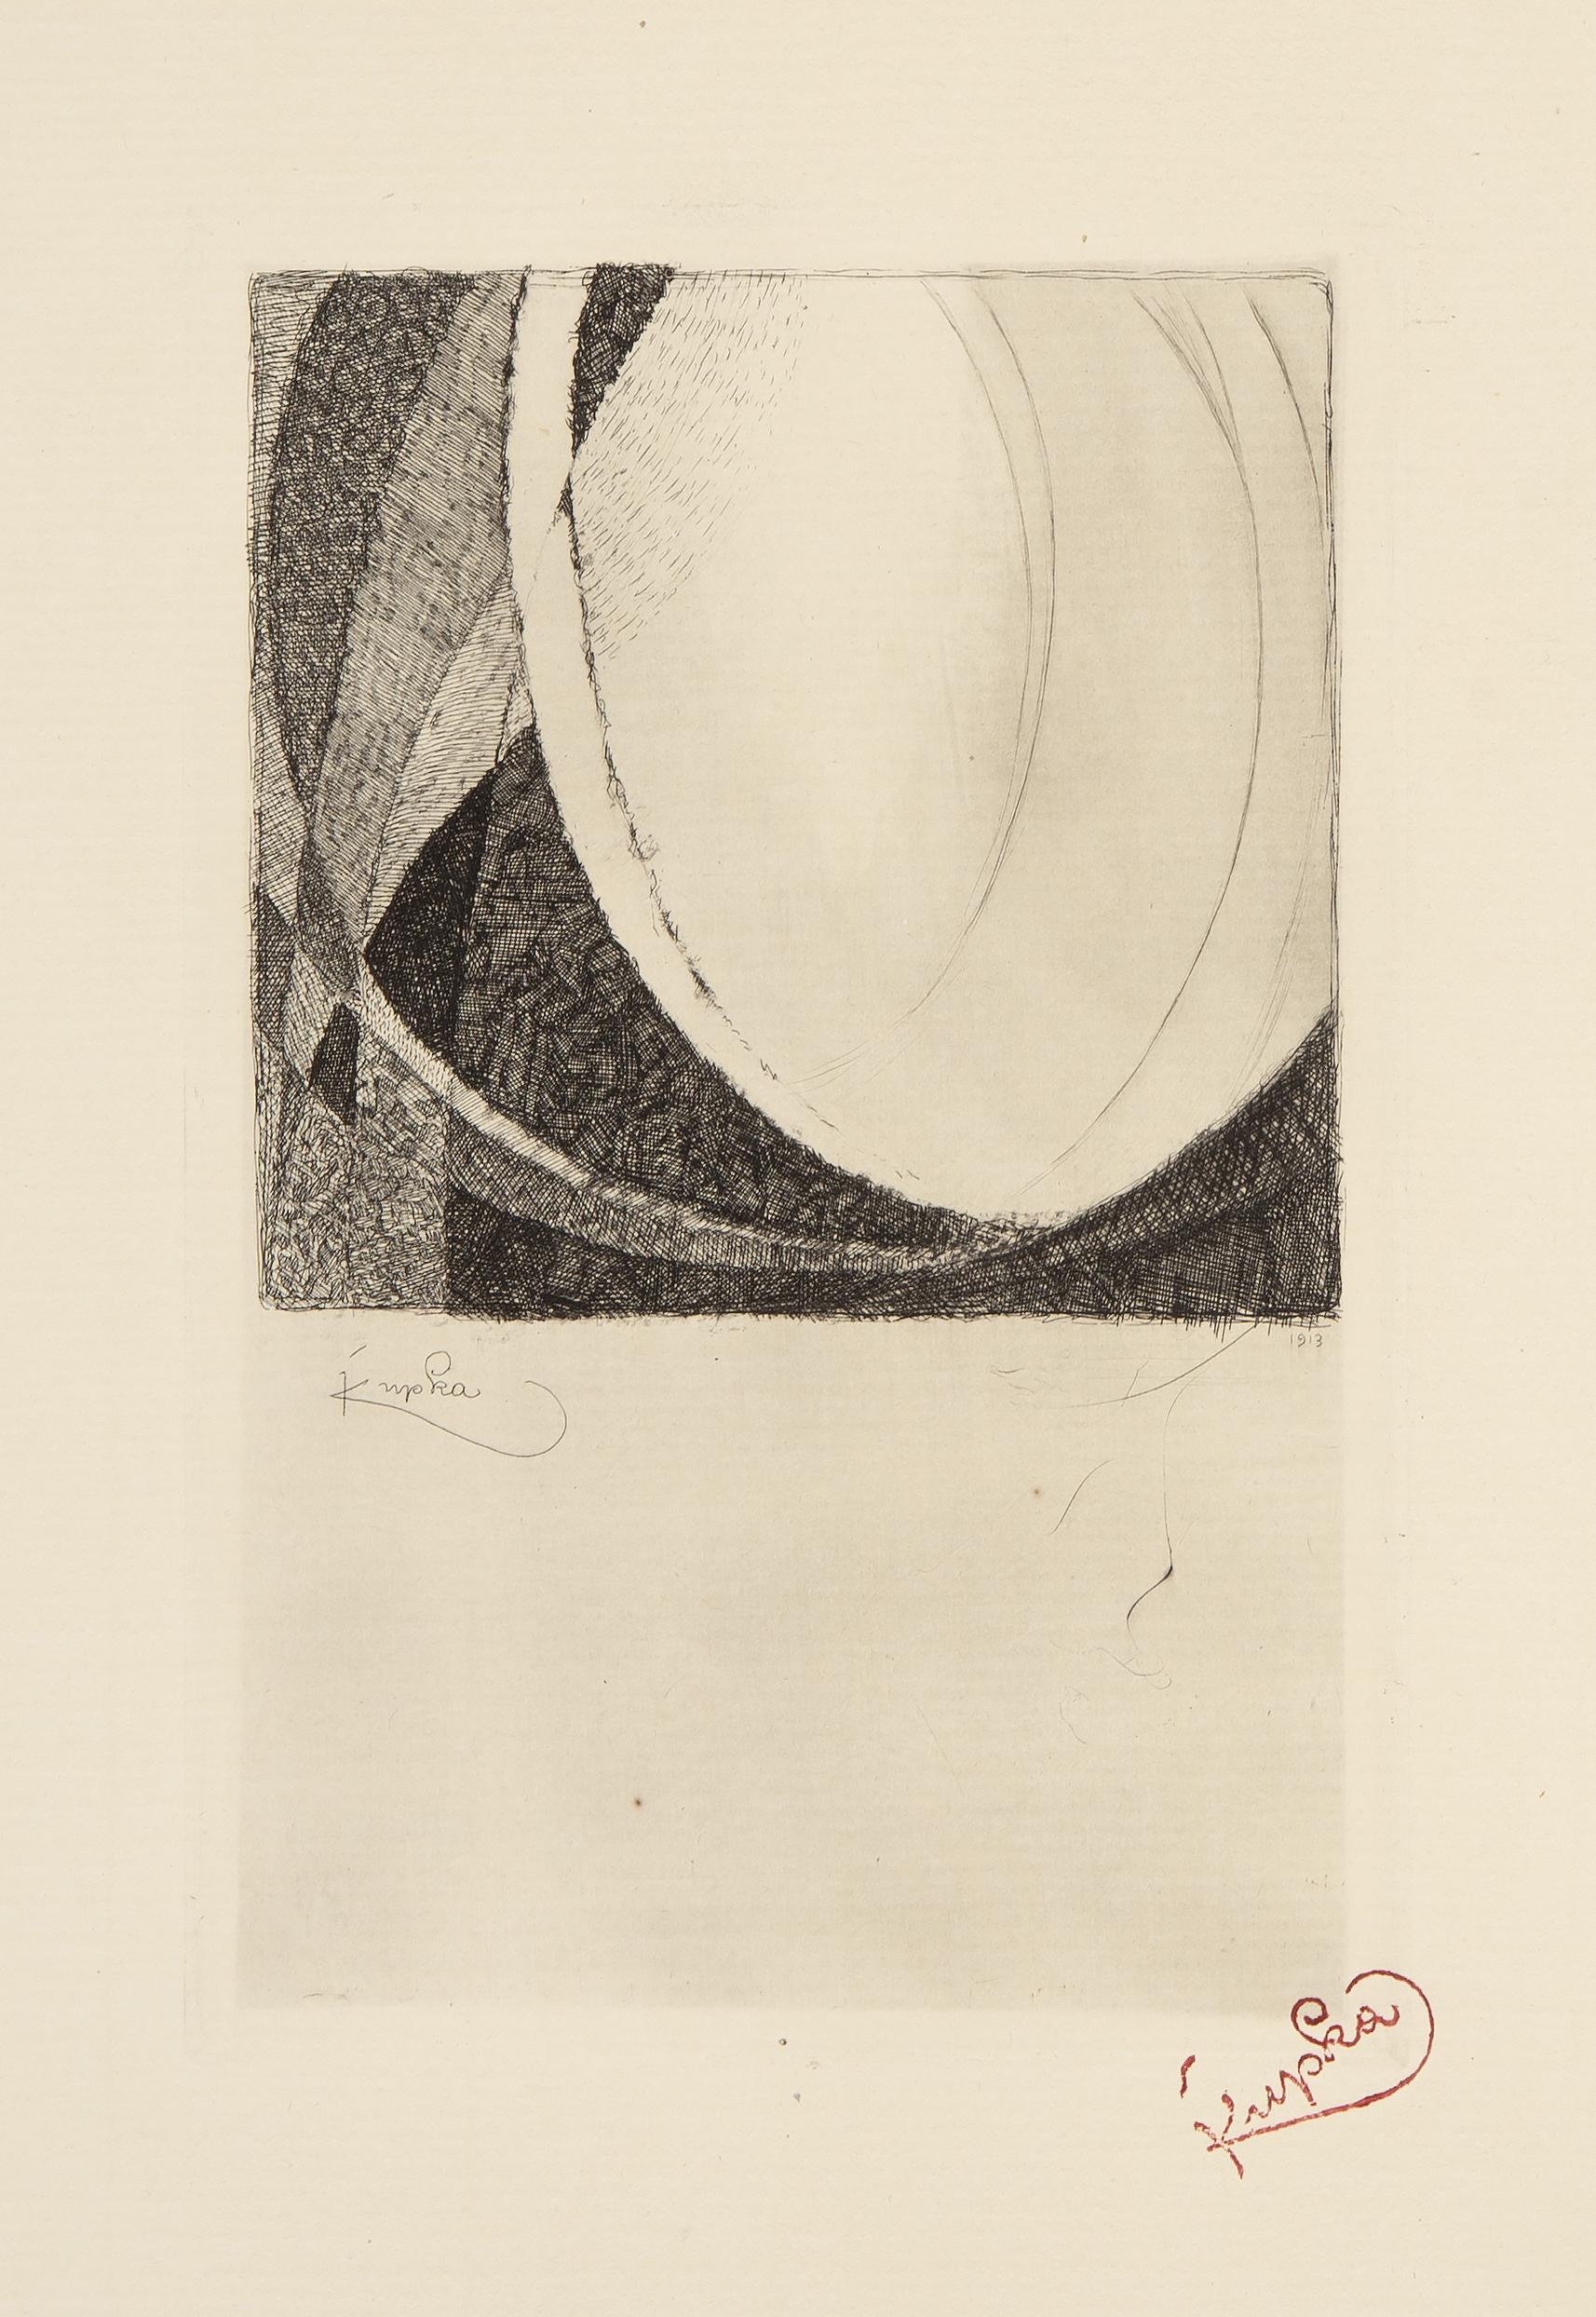 Frantisek Kupka, Czech (1871 - 1957) - Amorpha. Year: 1913, Medium: Etching on Richard de Bas, stamp signed, Image Size: 9 x 5.75 inches, Size: 20.25 x 12.75 in. (51.44 x 32.39 cm), Description: From the collection of the late Larry Saphire.